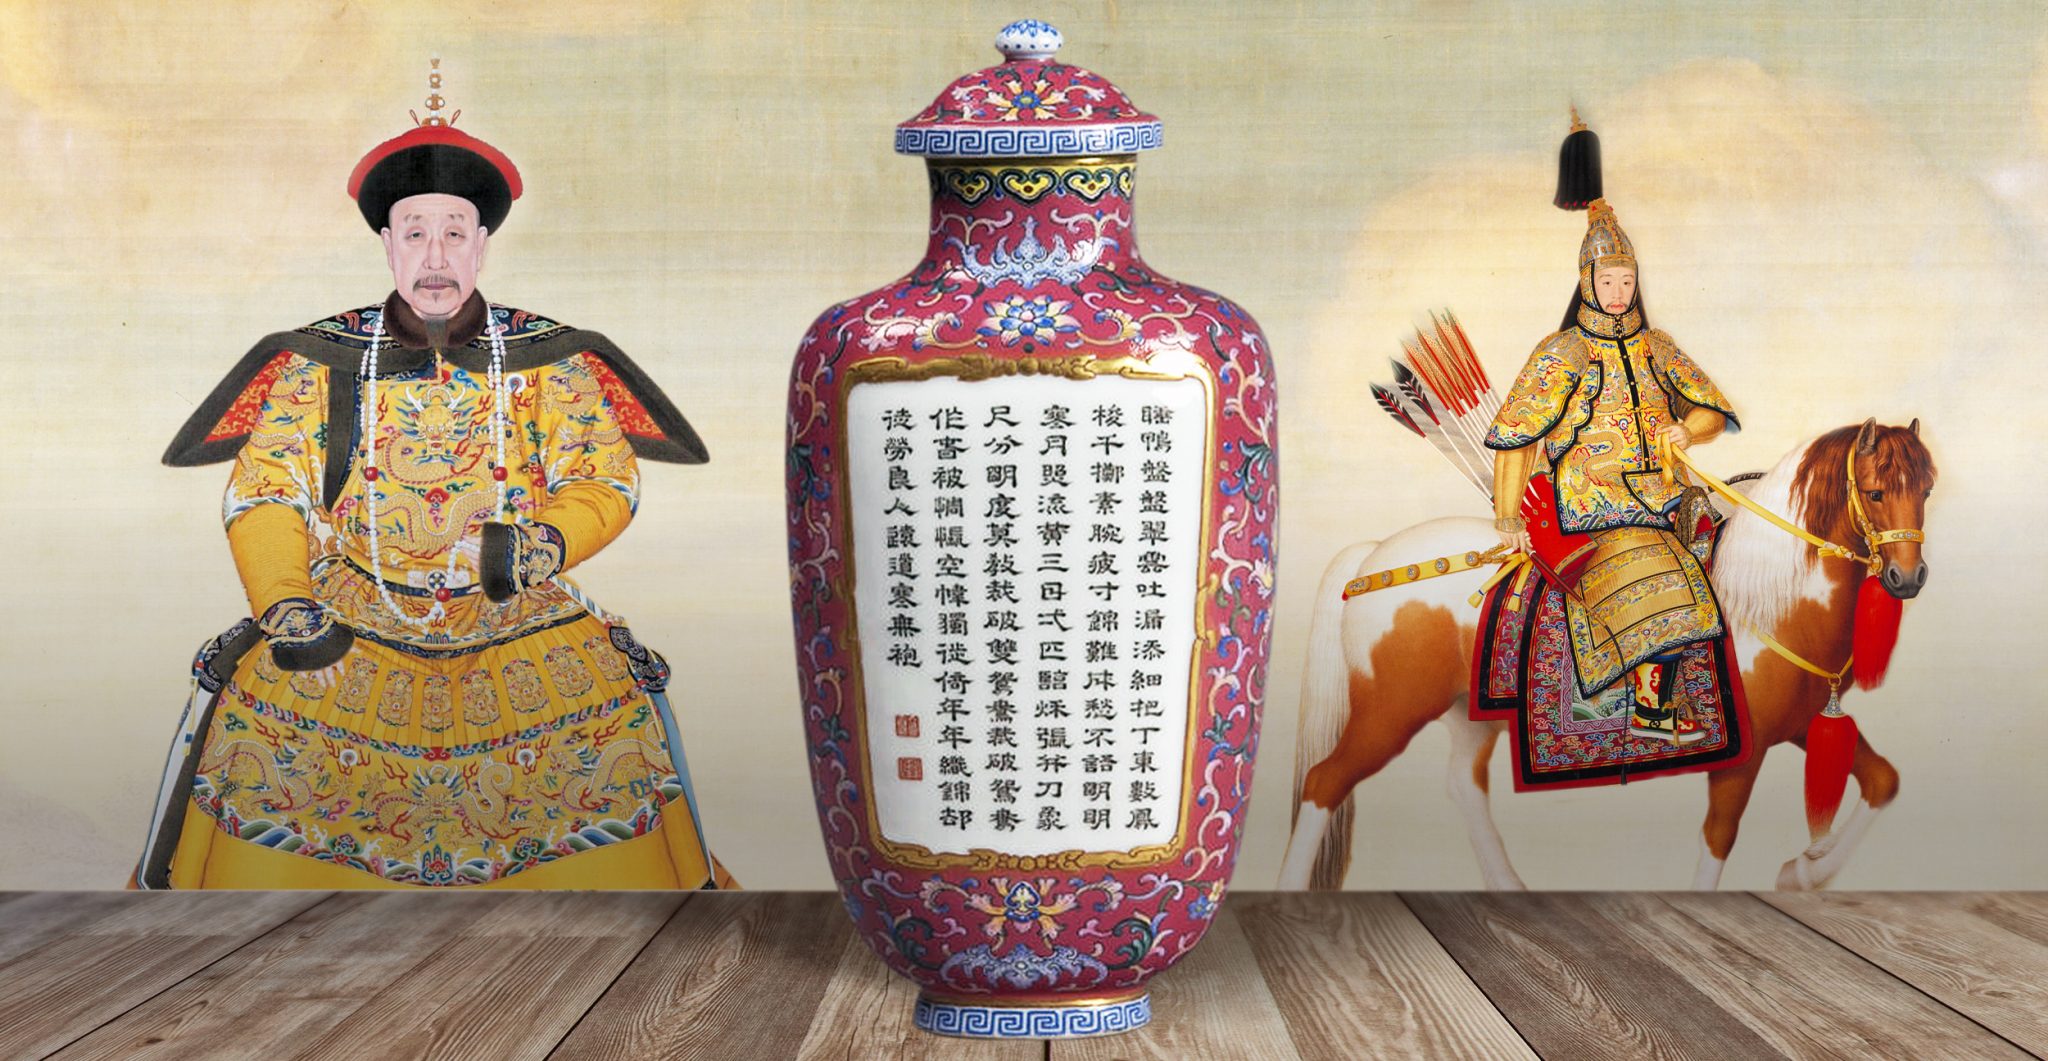 Chinese vase. This is not the one mentioned in the article.